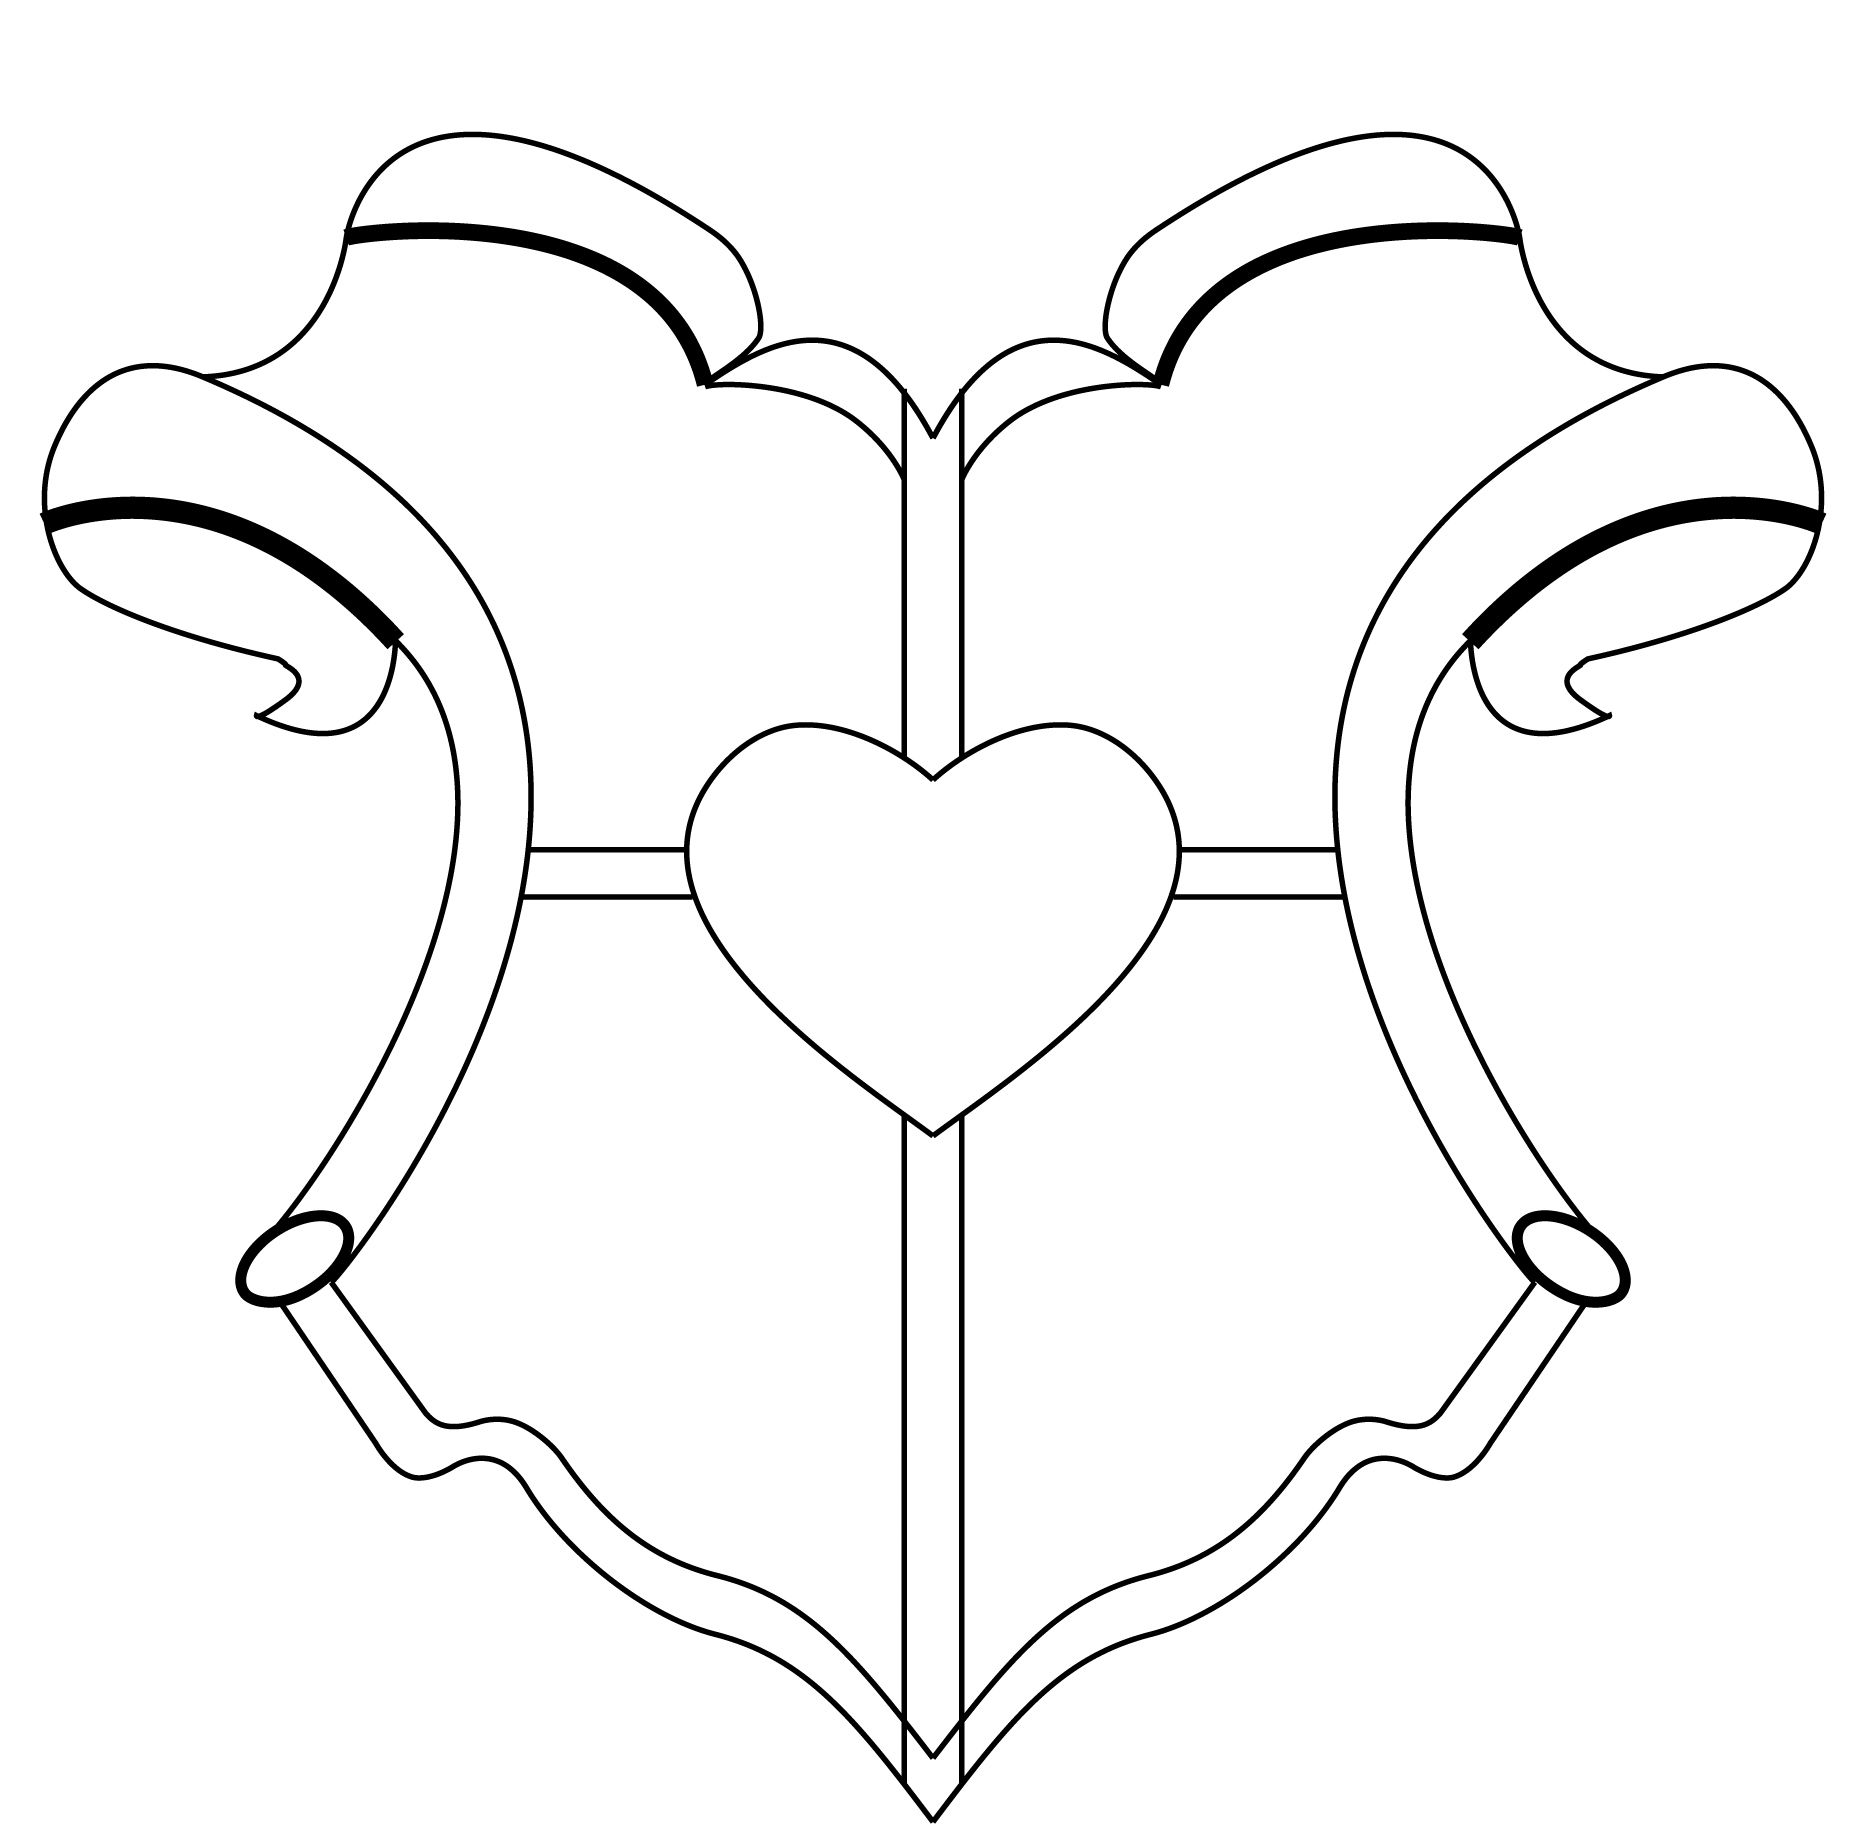 Blank Family Crest Template.